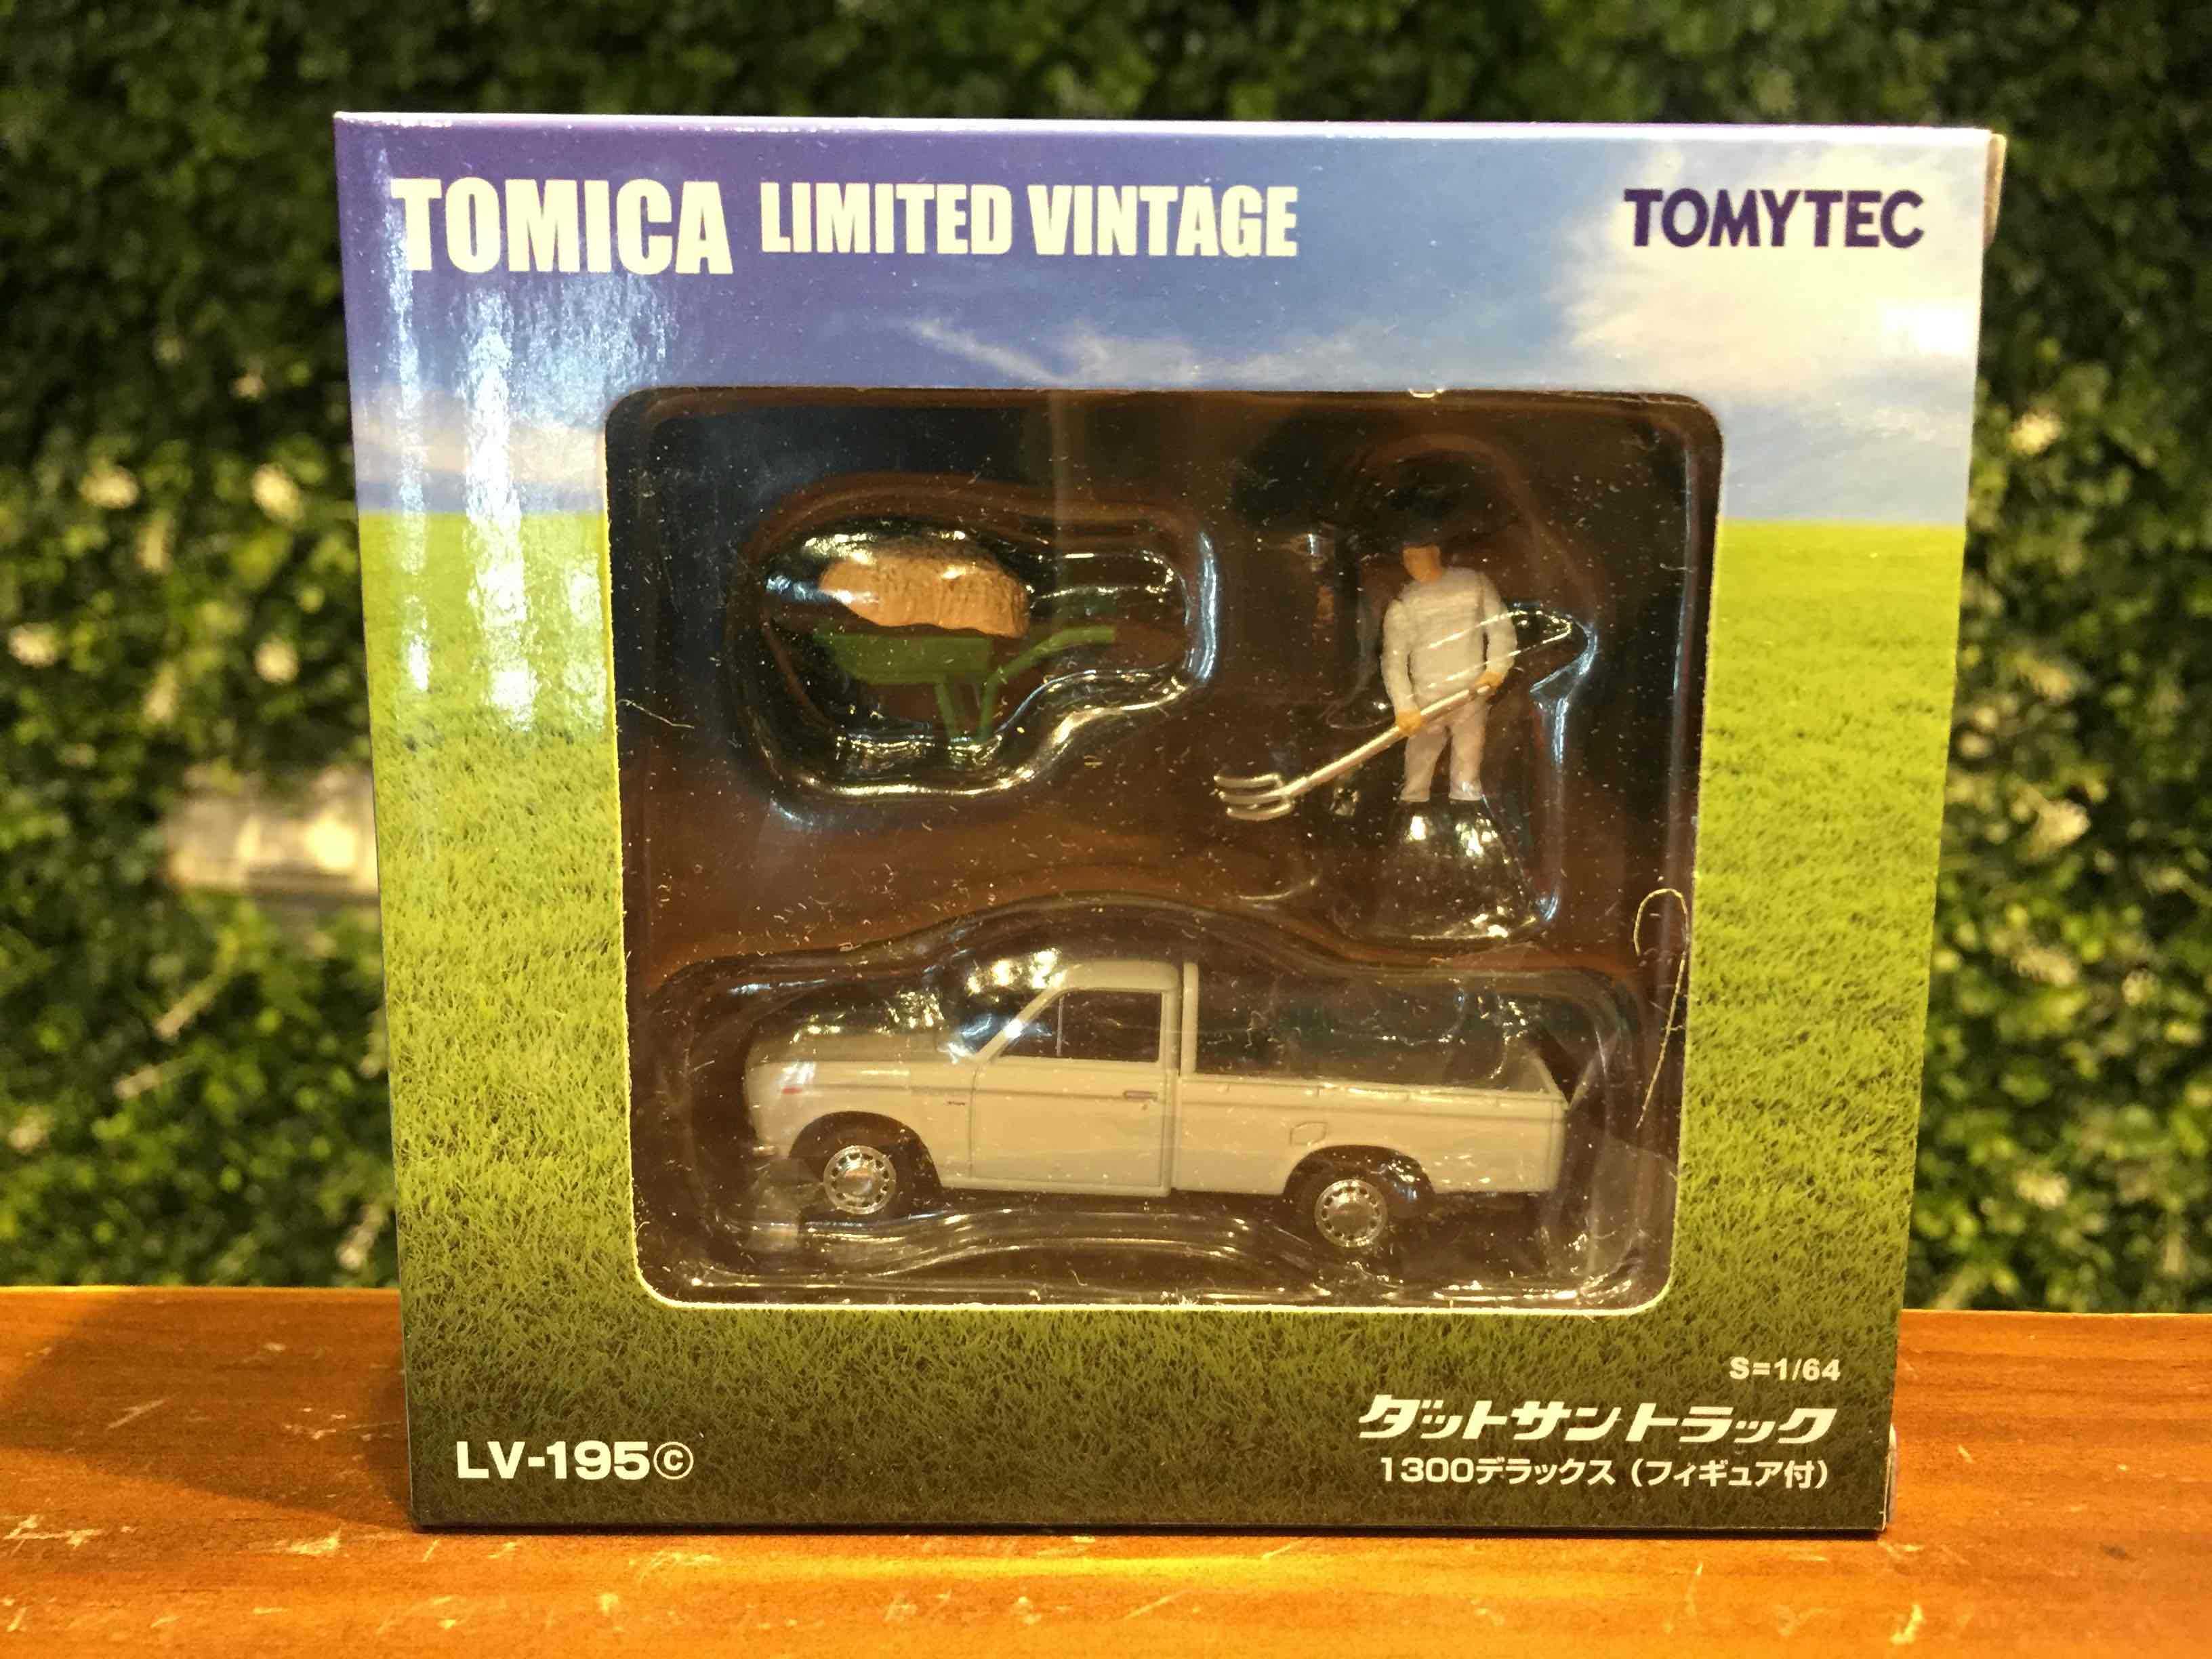 1/64 Tomica Datsun Truck 1300 Deluxe Figure LV-195c【MGM】